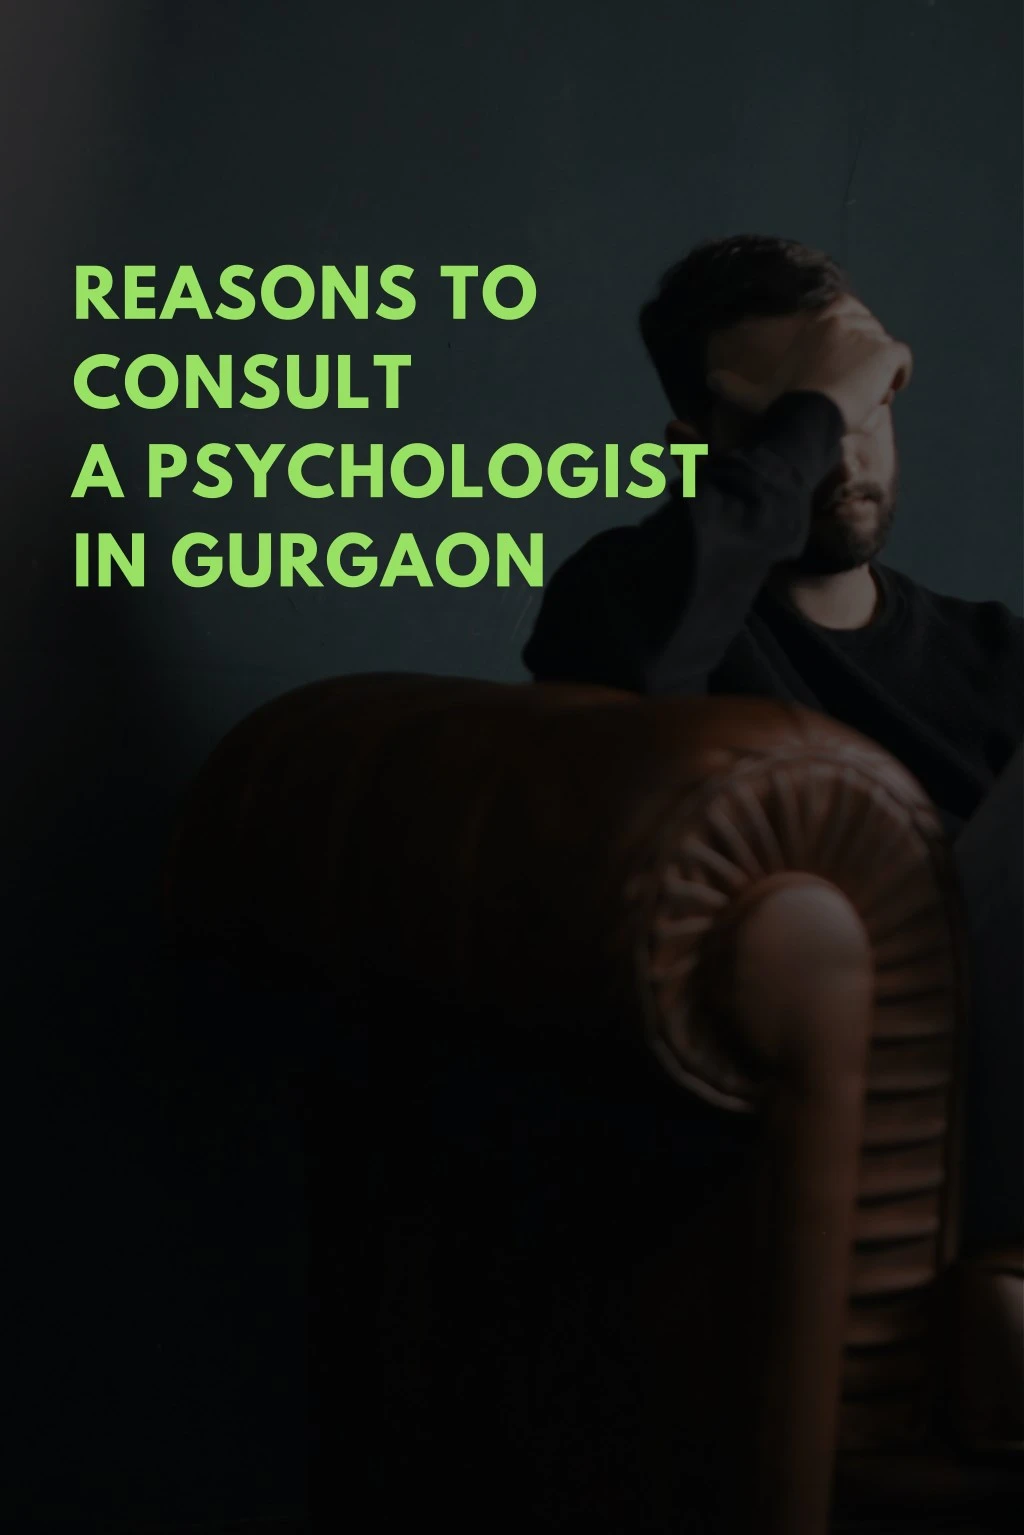 reasons to consult a psychologist in gurgaon